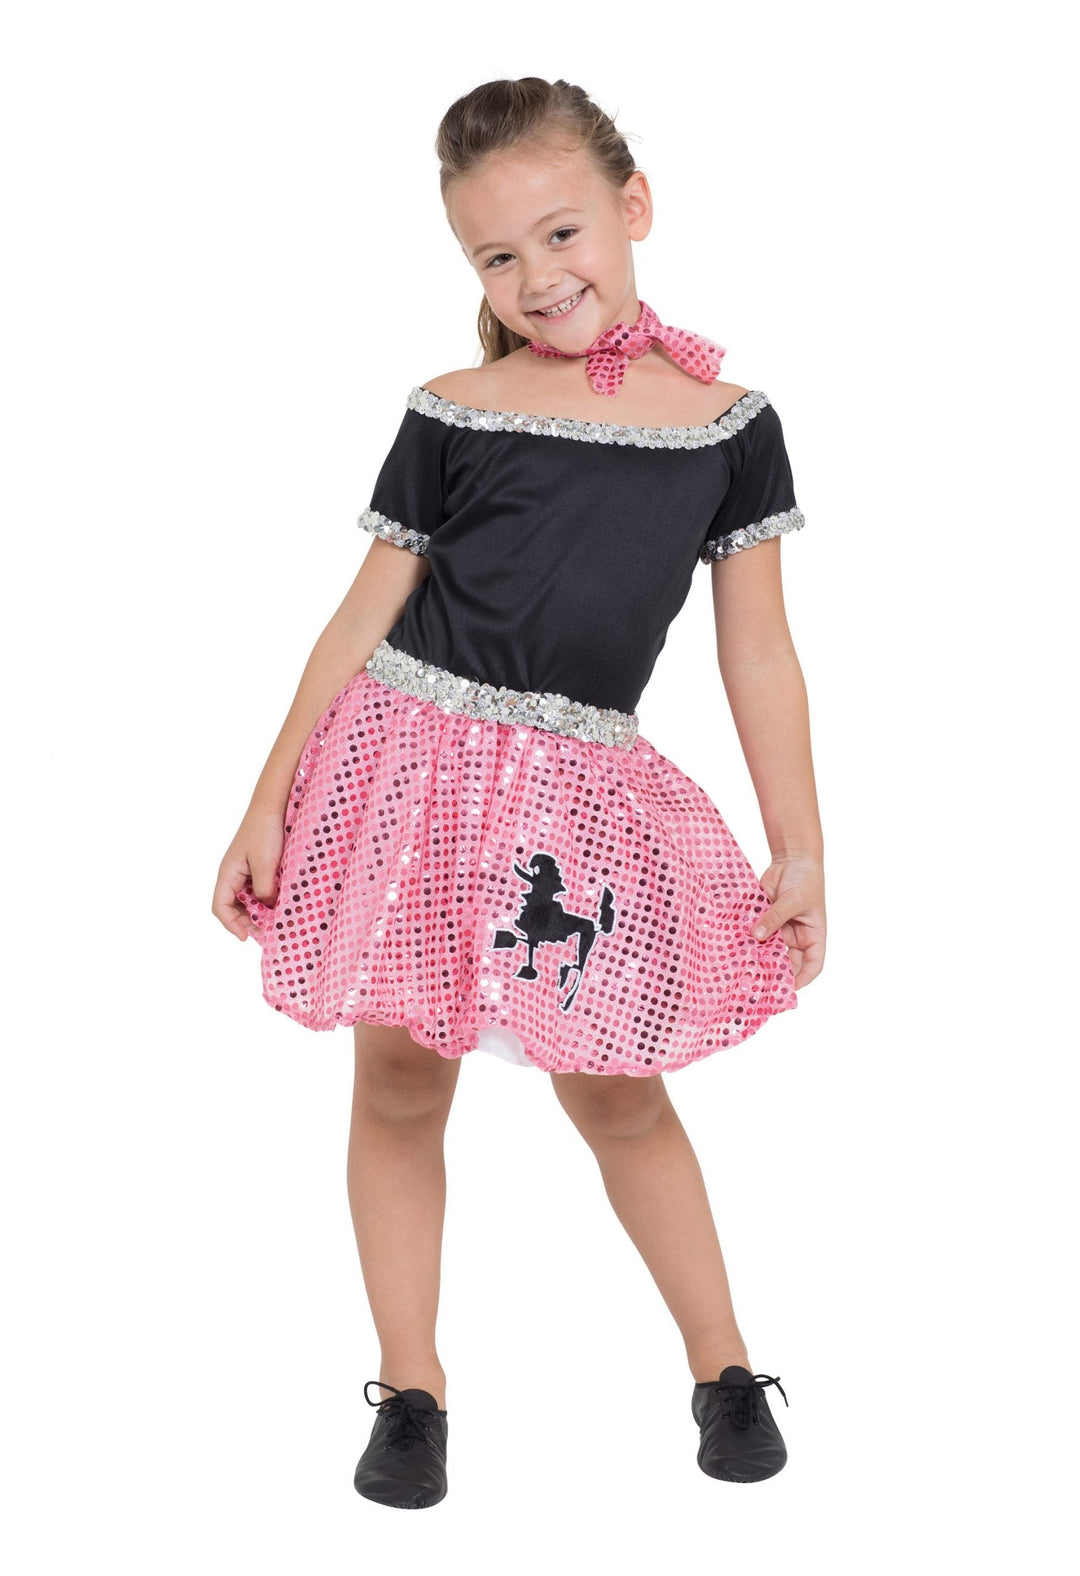 Rock and Roll Sequin Dress Pink Poodle Girl Costume_1